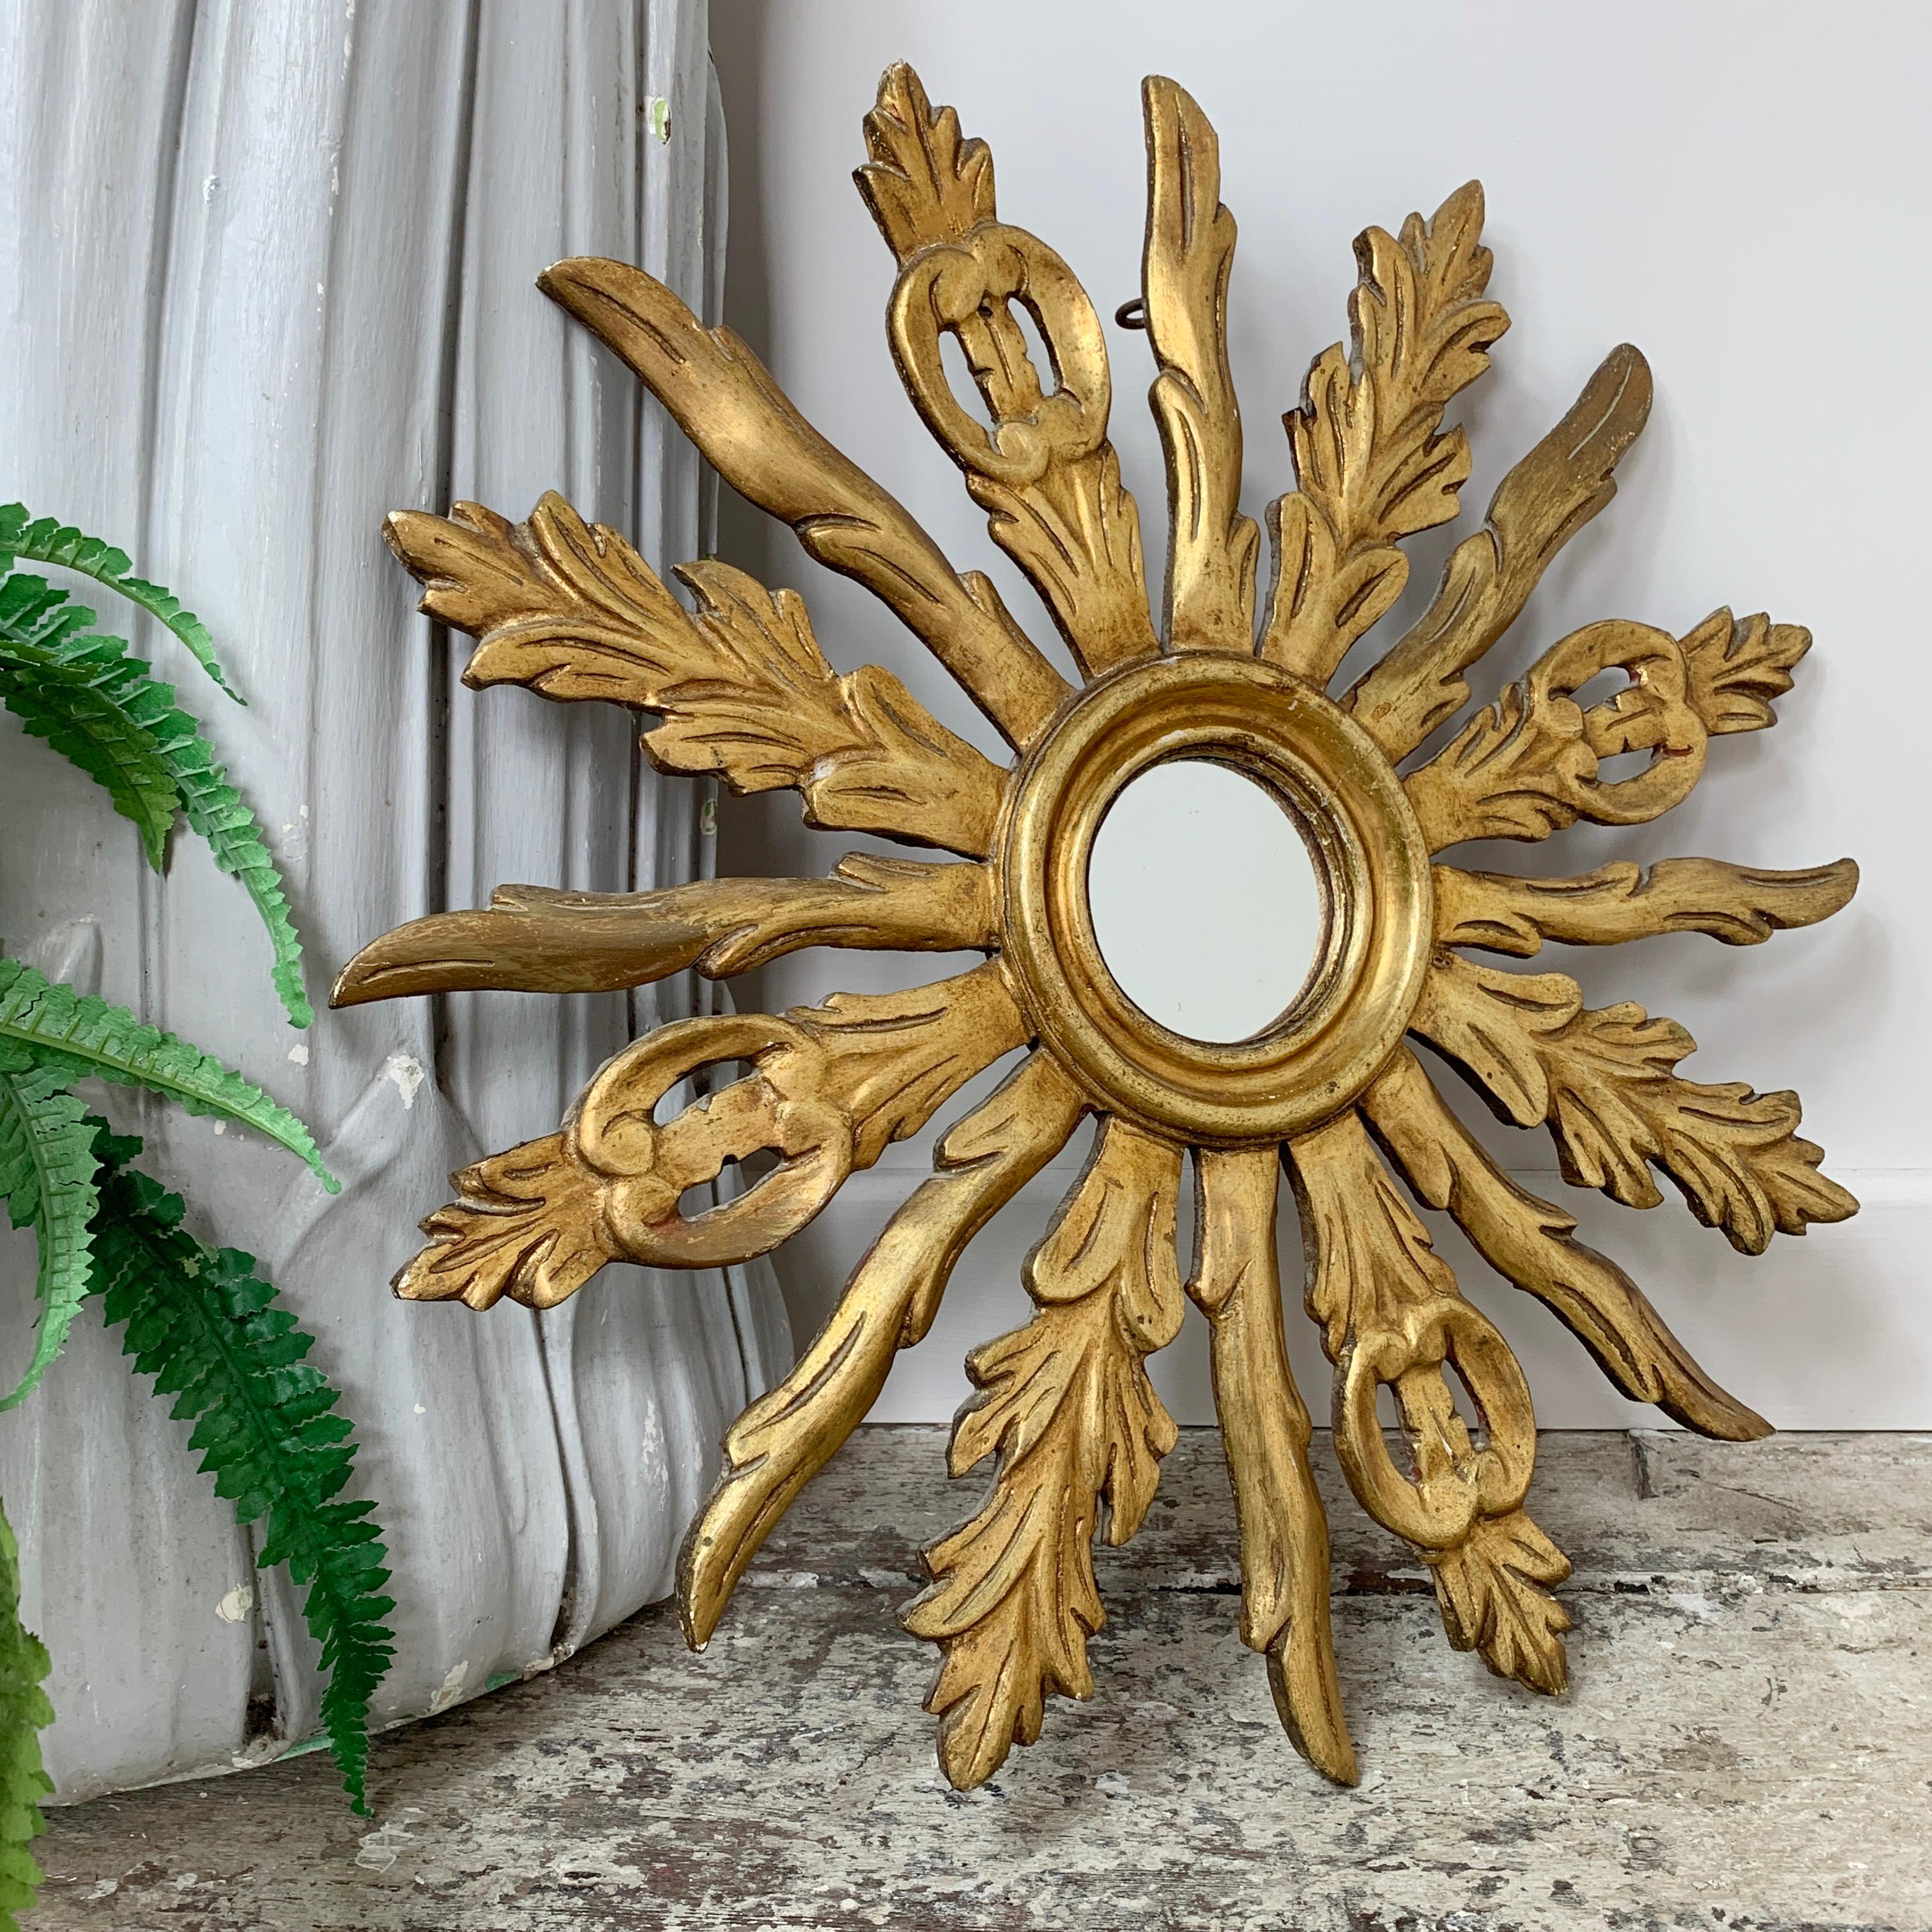 Ornately carved French wooden sunburst mirror, mid century, with beautiful original gilt finish
Measures: 50cm width/height, 3cm depth, mirror glass 8.5cm
Fabulous decorative shaping and design to the full rays, a very decorative sunburst
Hanging